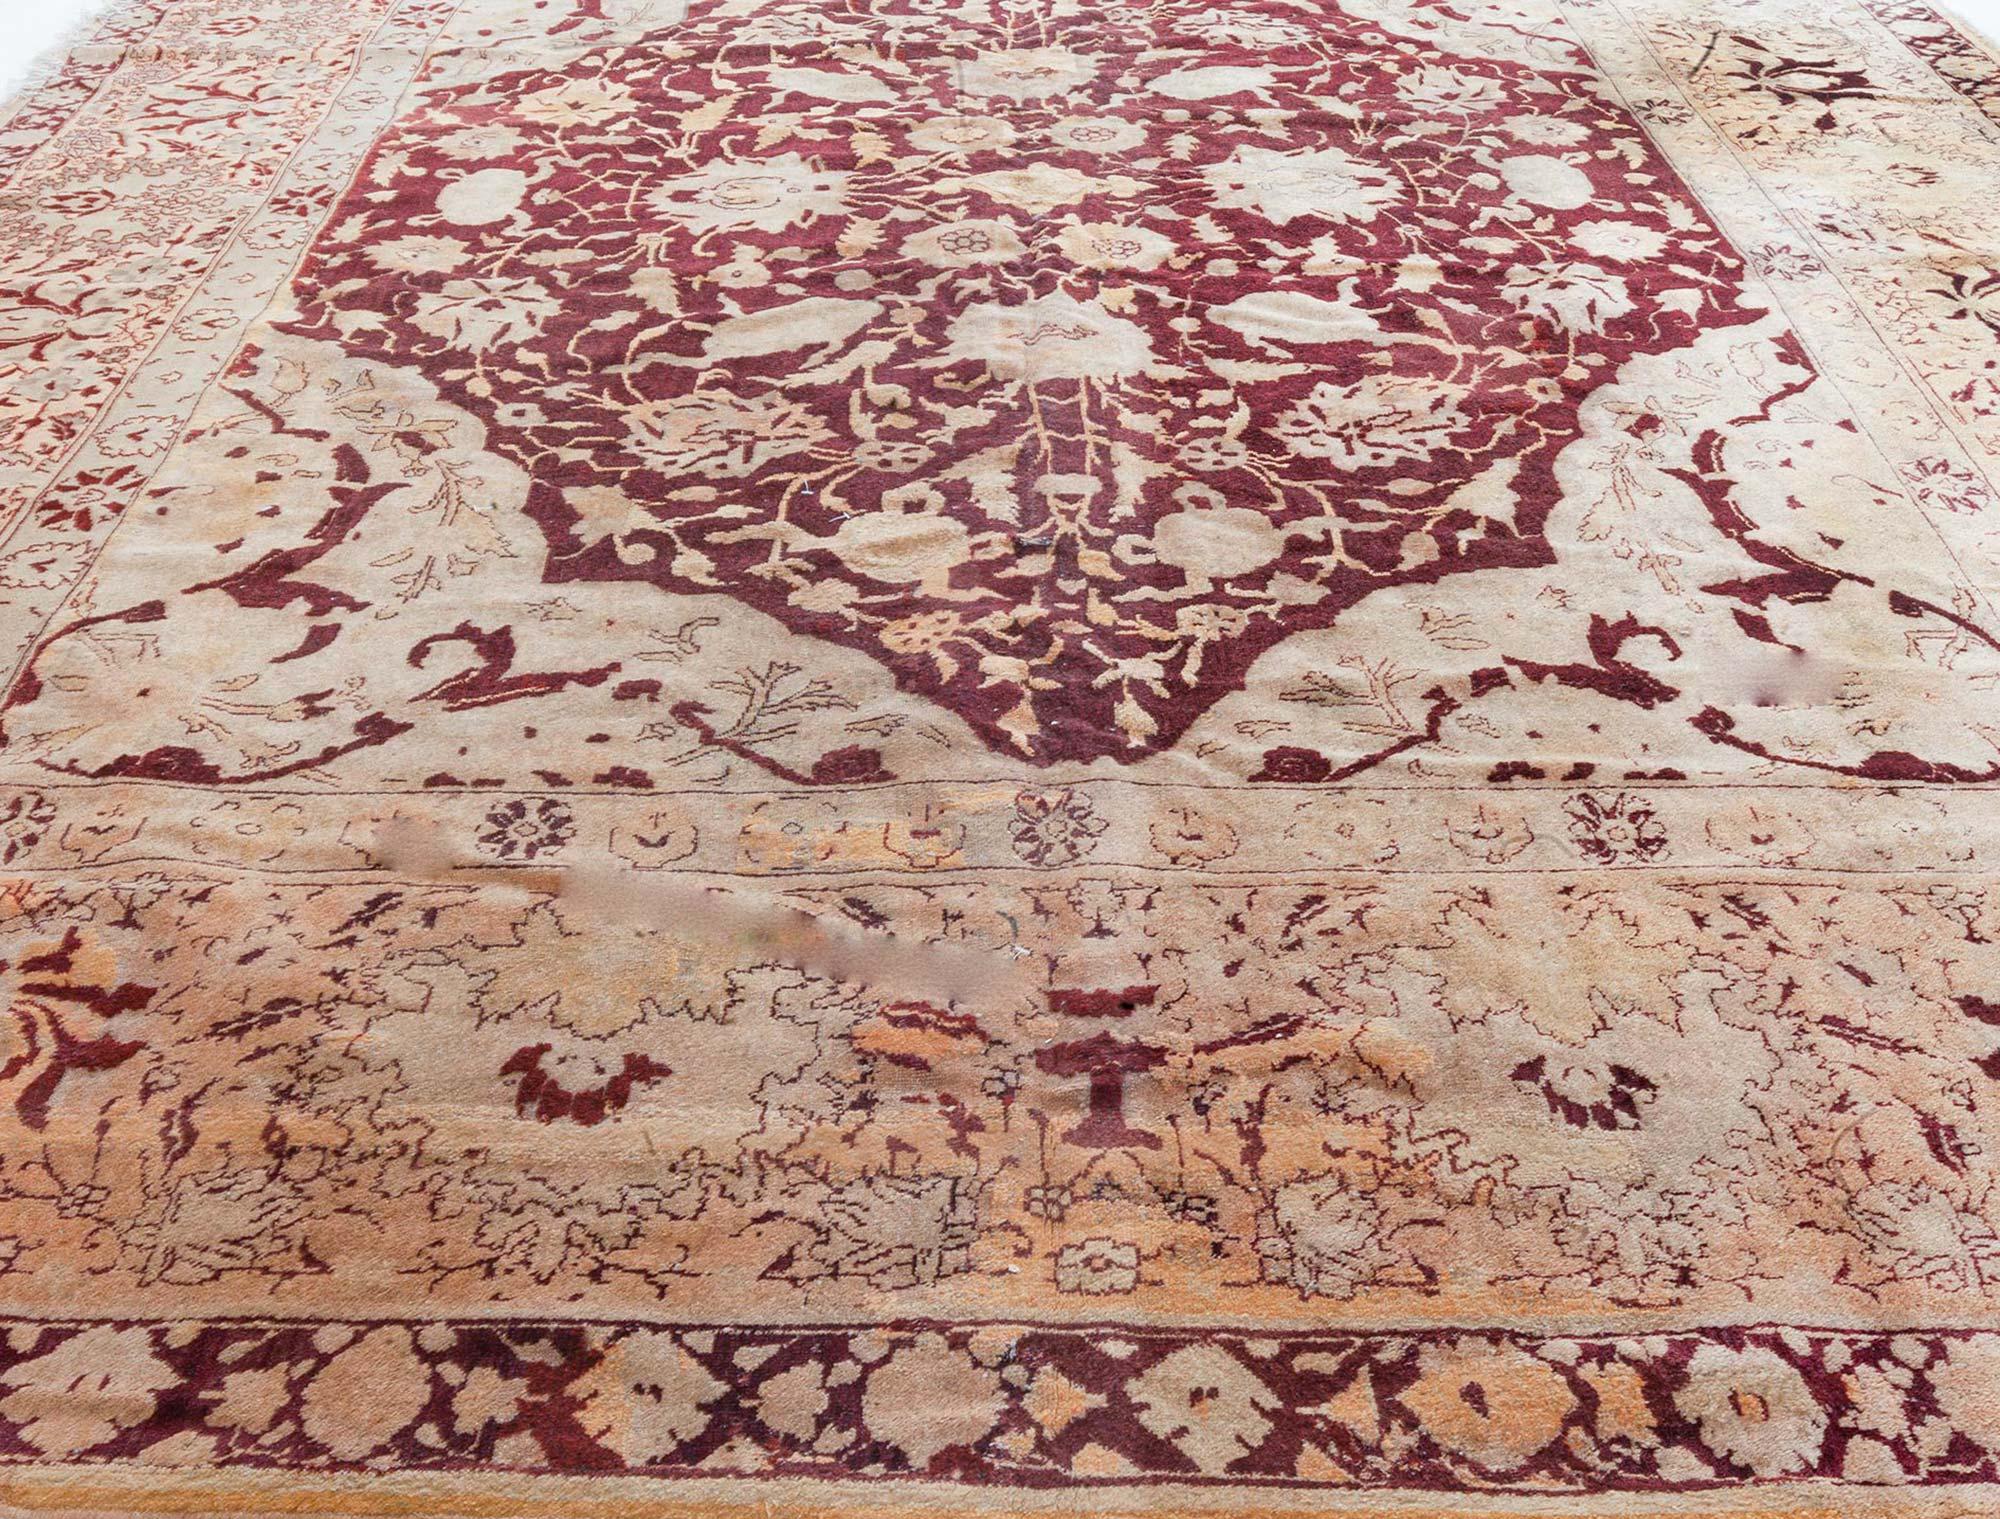 Antique Indian Amritsar Red and Beige Wool Carpet 3